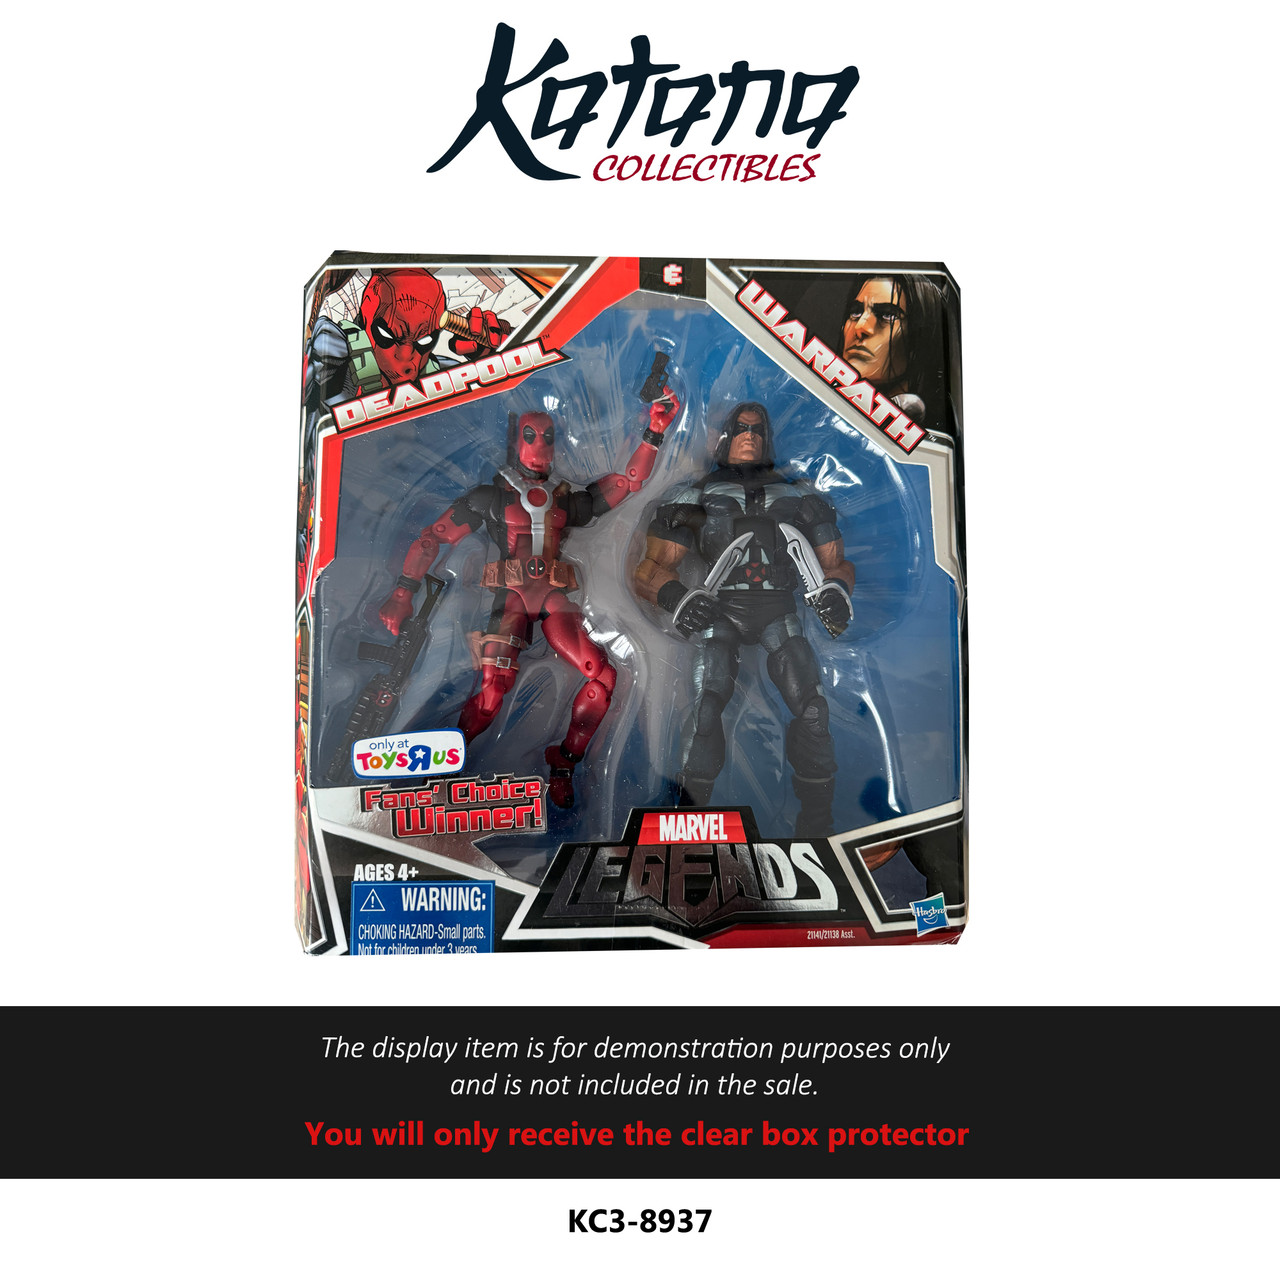 Katana Collectibles Protector For Marvel Legends Deadpool/Warpath Toys R Us 2 Pack